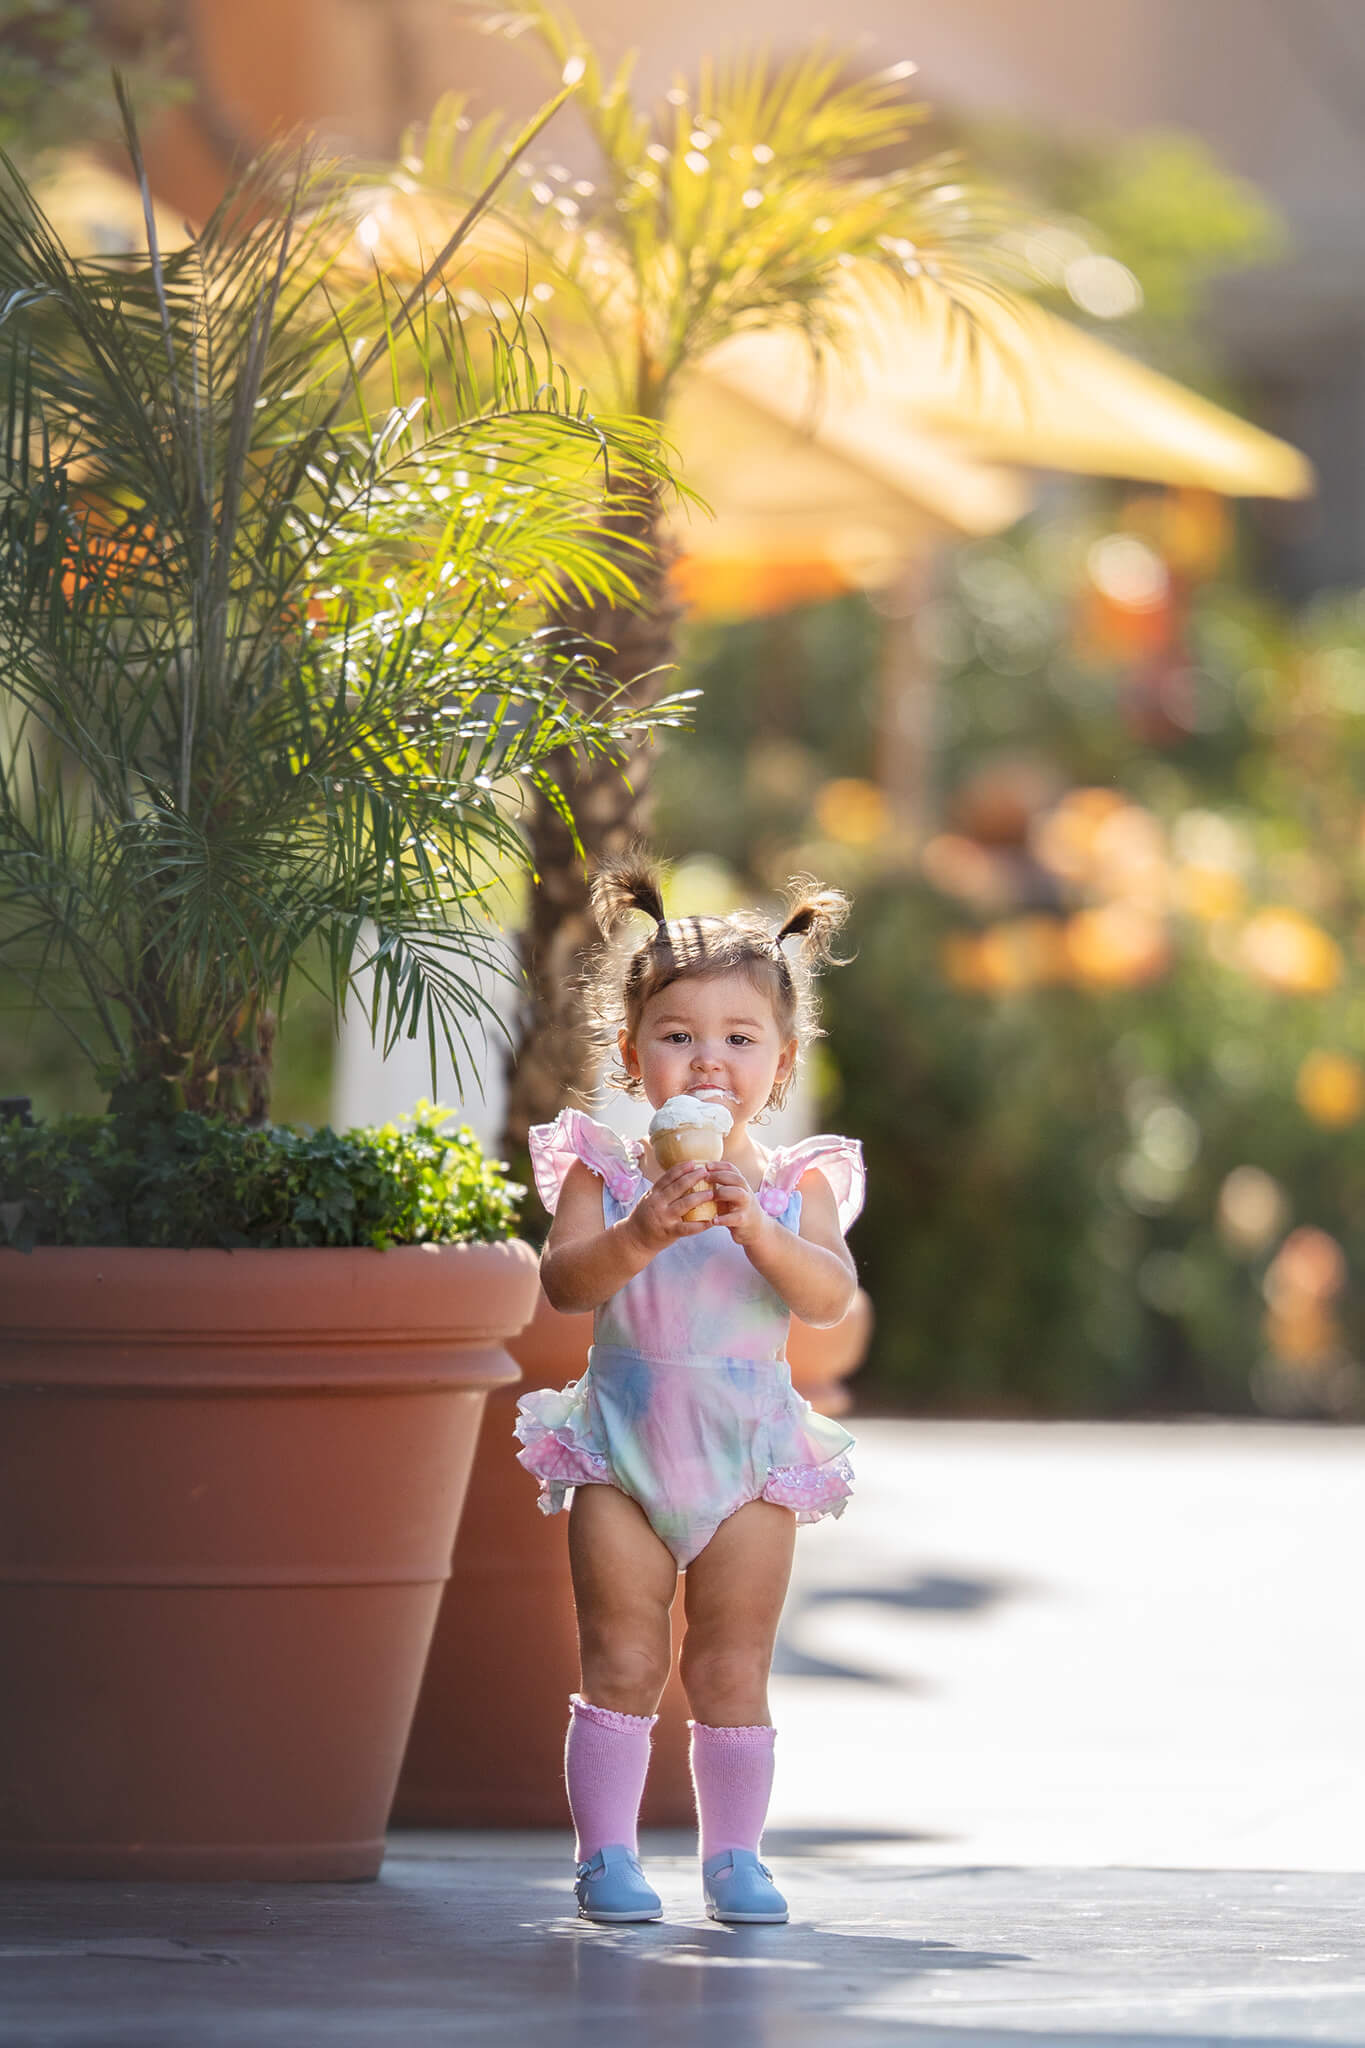 Little girl eating ice cream in Calabasas, CA - best ice cream places to take your kids in Los Angeles